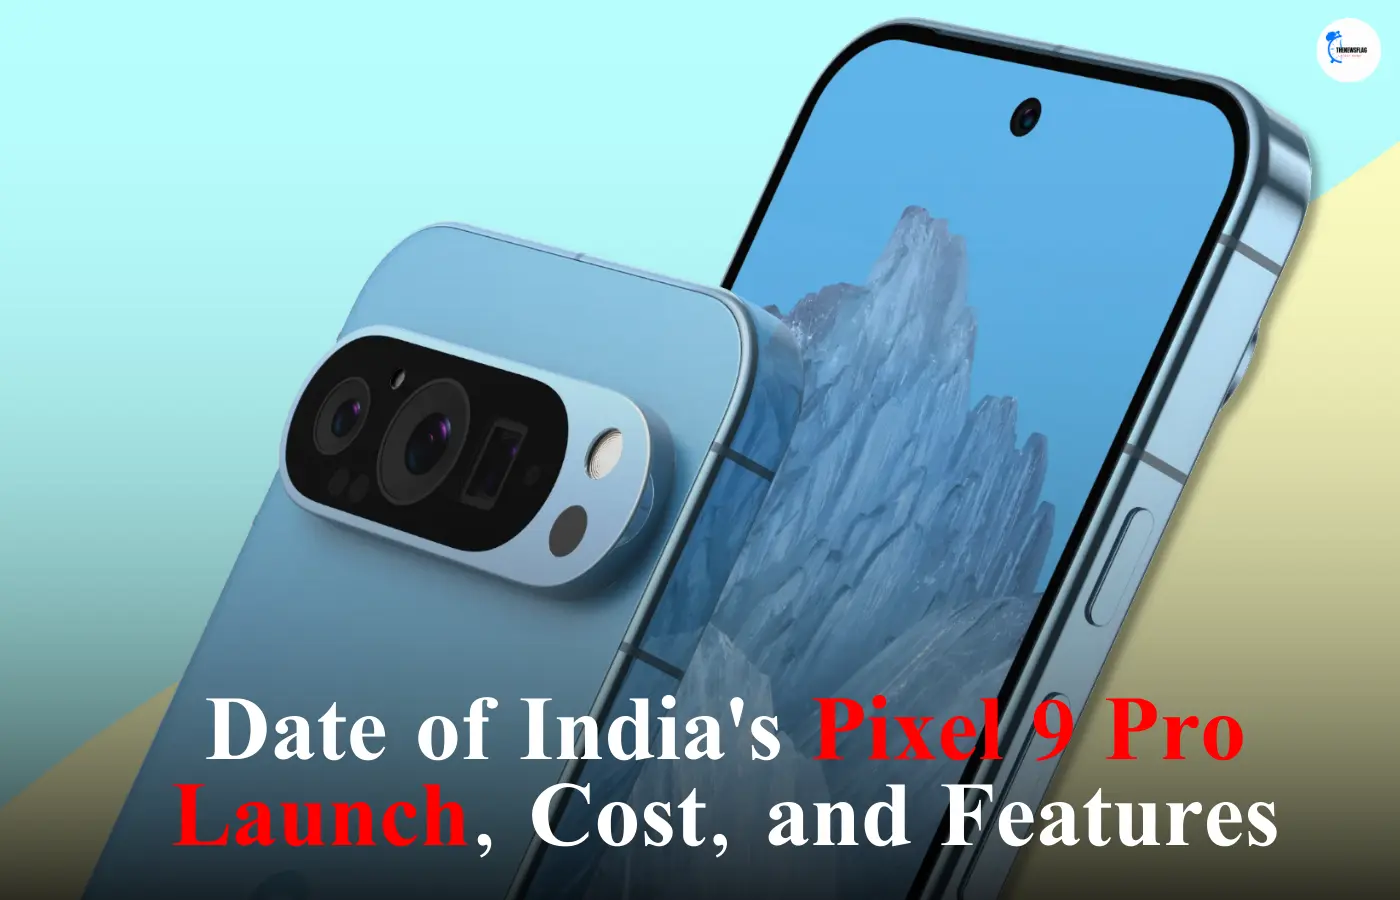 Date of India's Pixel 9 Pro Launch, Cost, and Features